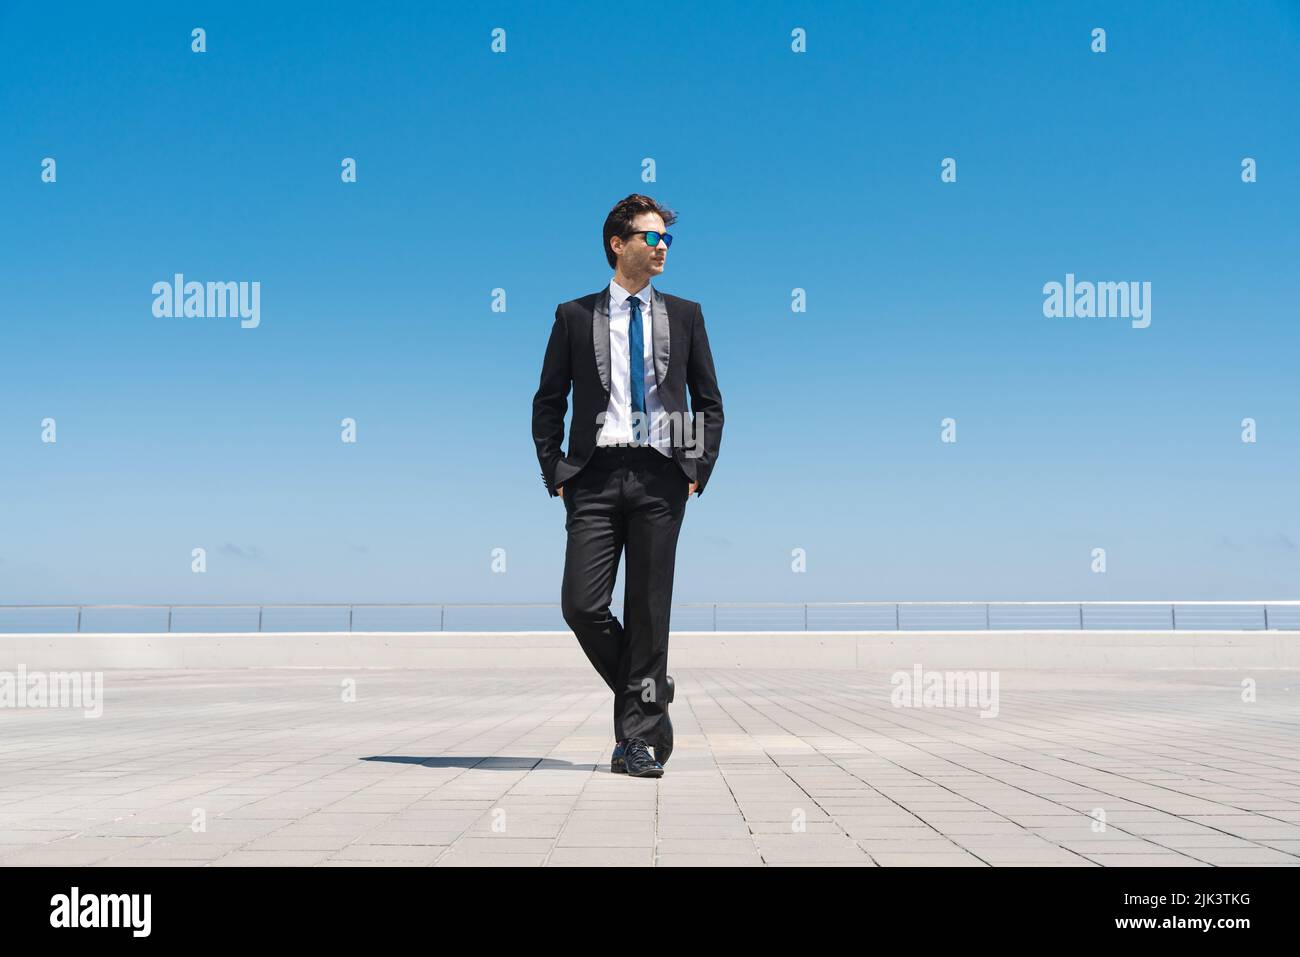 Happy and handsome adult businessman wearing elegant suit standing outdoors, full body portrait Stock Photo